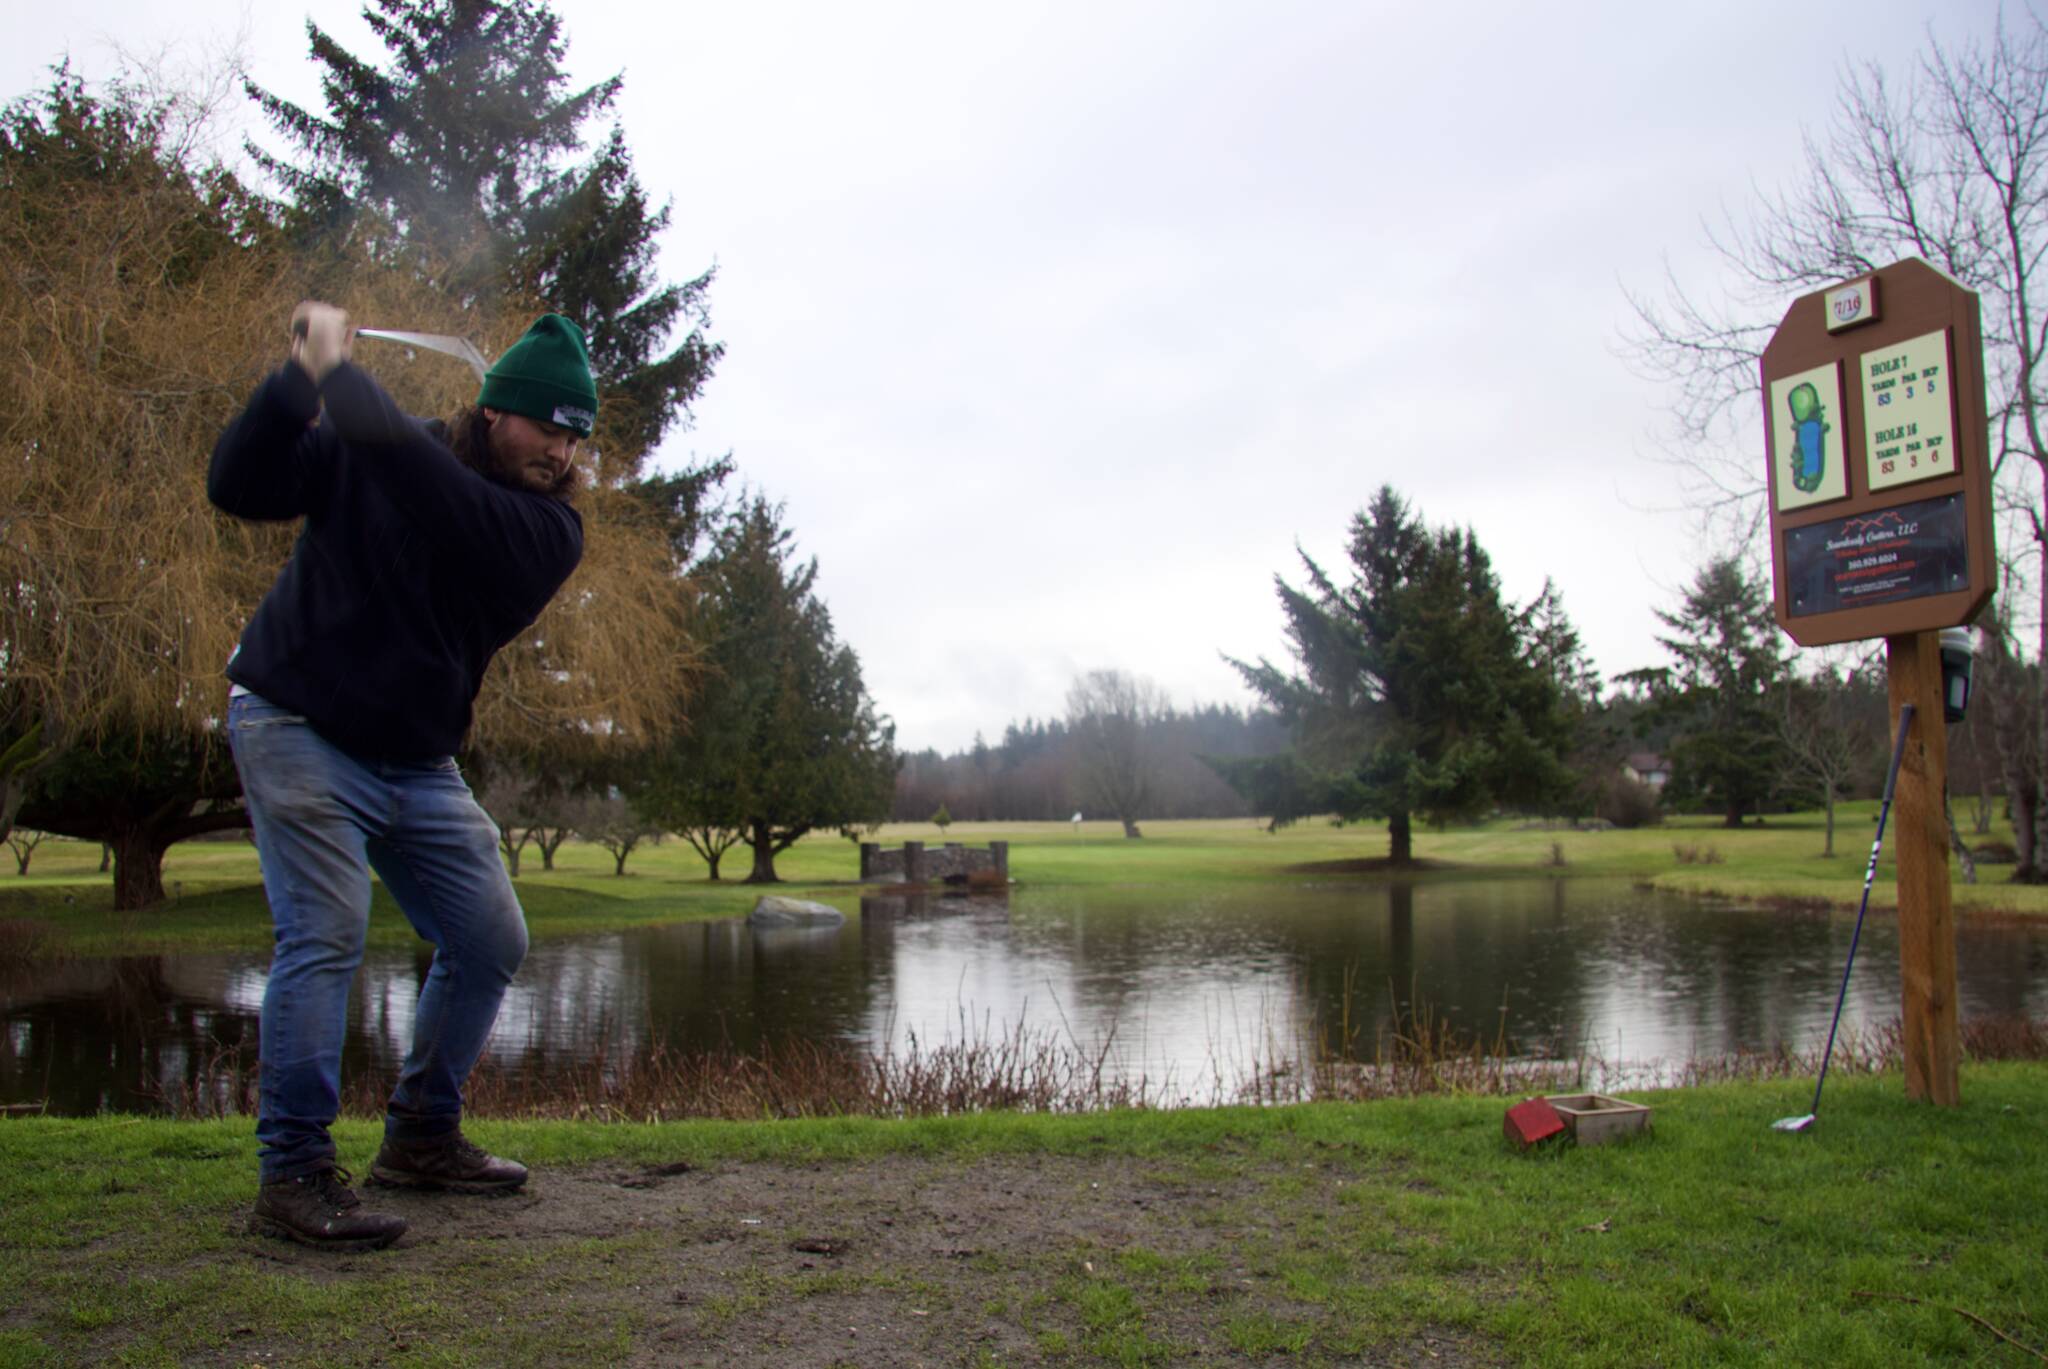 Photo by Rachel Rosen/Whidbey News-Times
Ian Kenney, who owns Deception Pass Golf Center with his father Don, tees off at the course’s most picturesque hole.